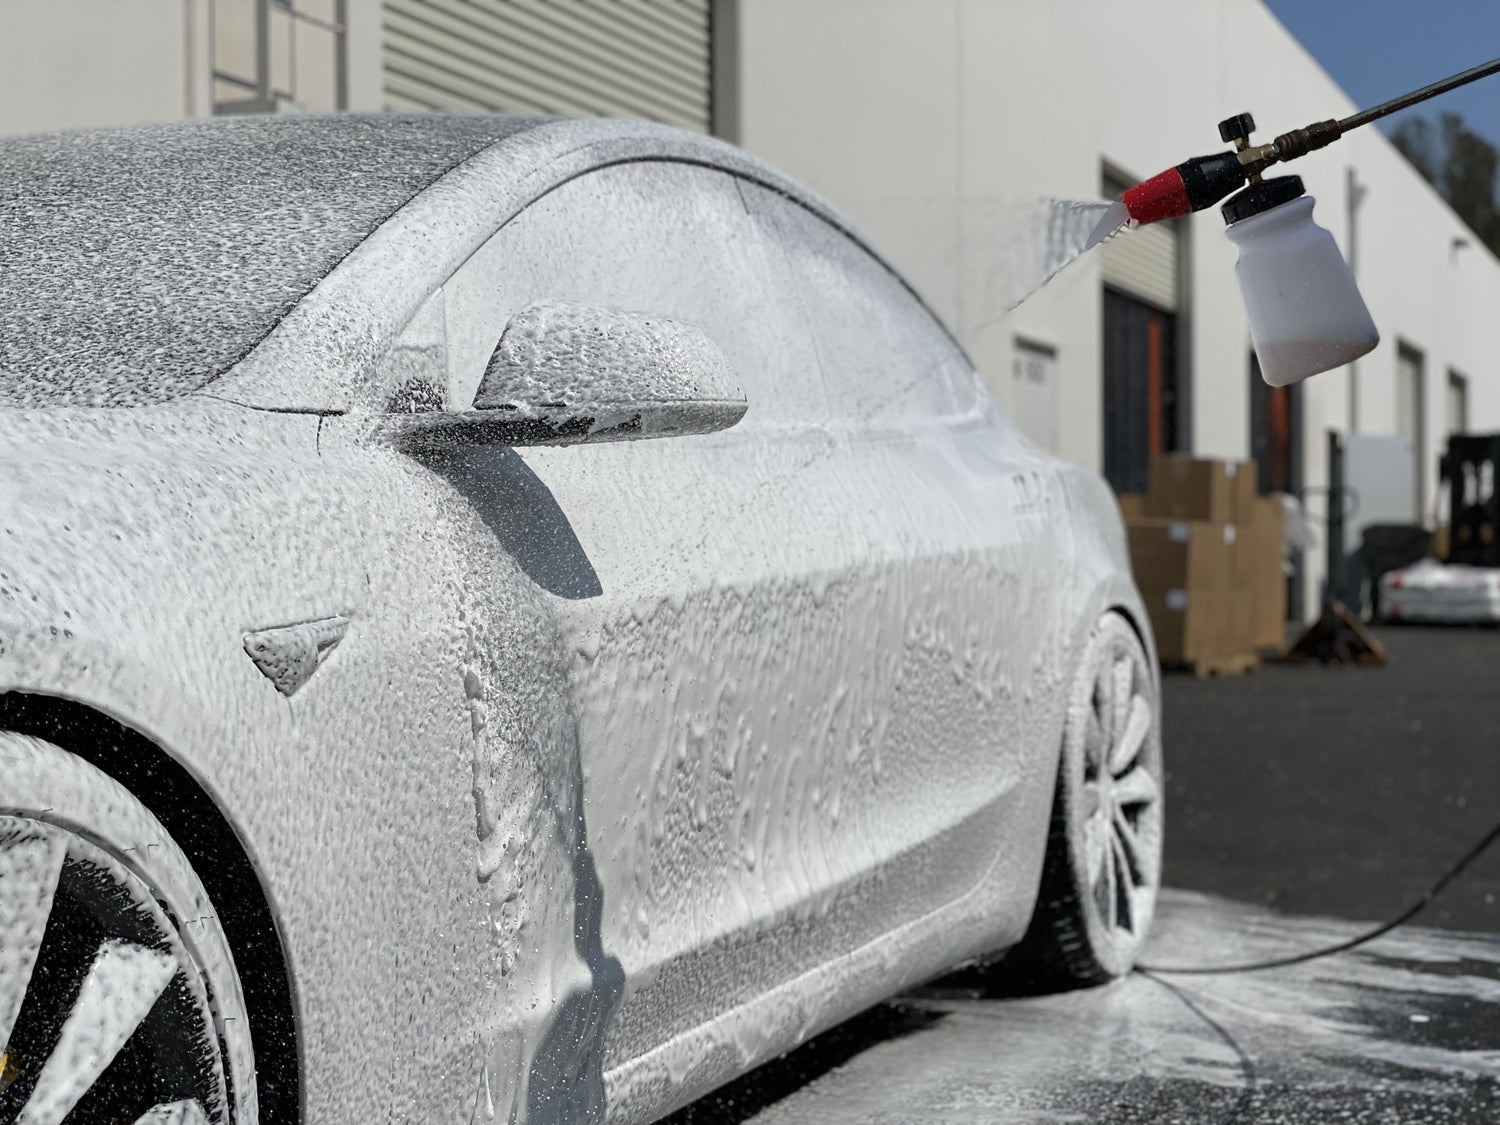 Tesla Cleaning Guide: Tips for Washing and Maintaining Your Electric C